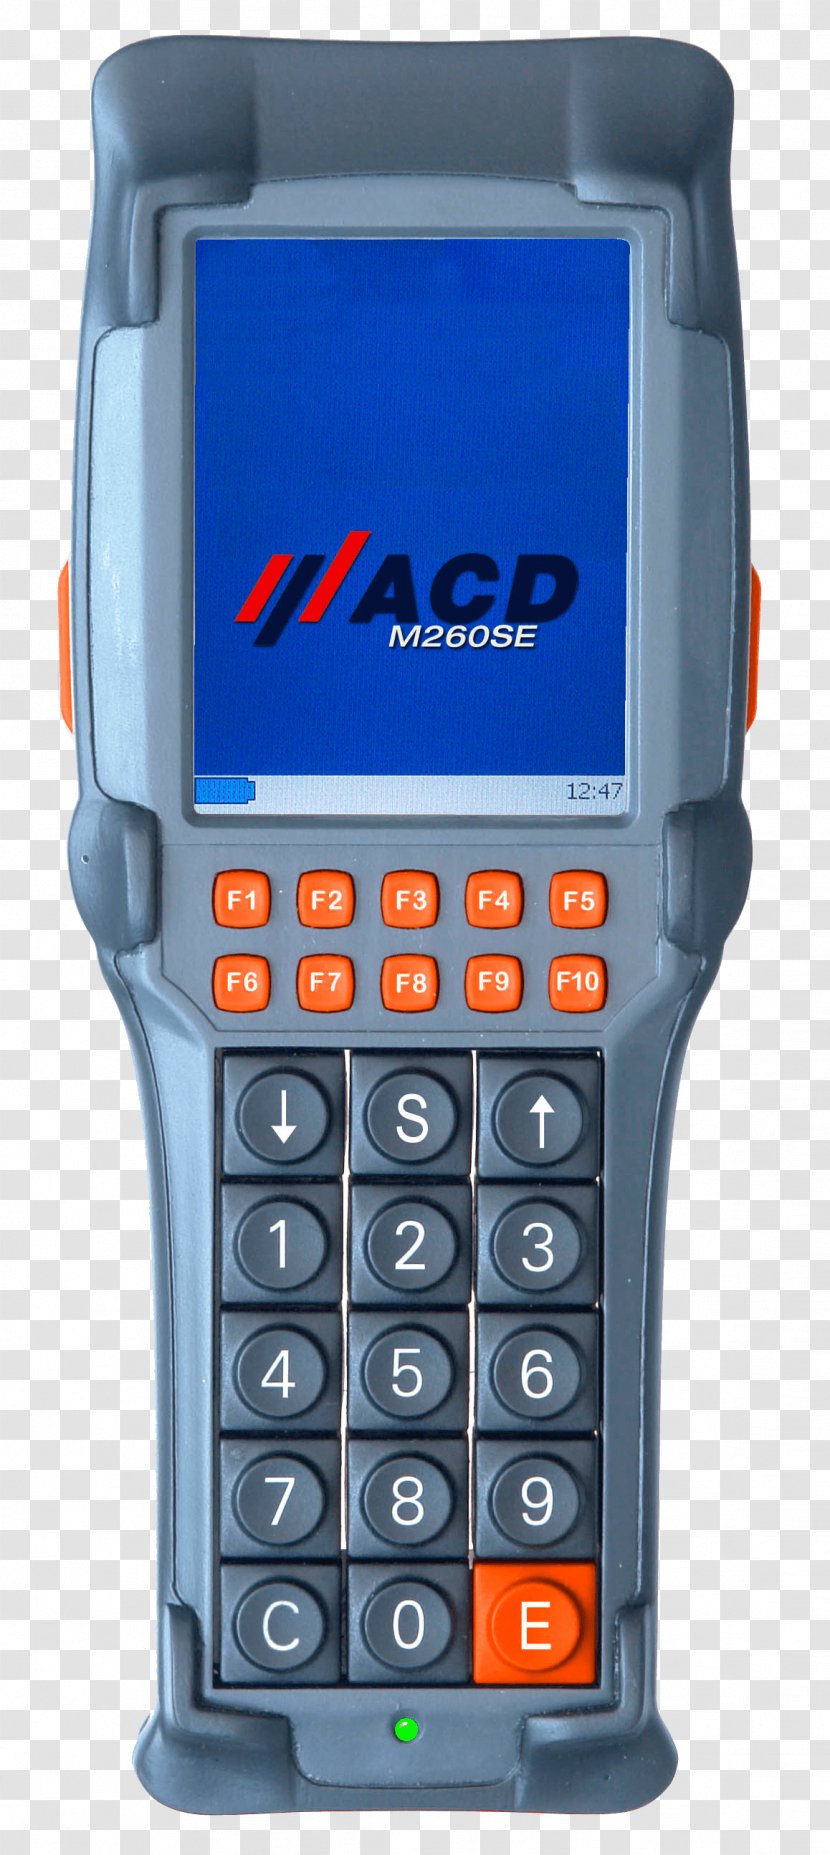 Telephony Computer Hardware Terminal Handheld Devices Automatic Call Distributor - Portable Communications Device - Mobile Transparent PNG